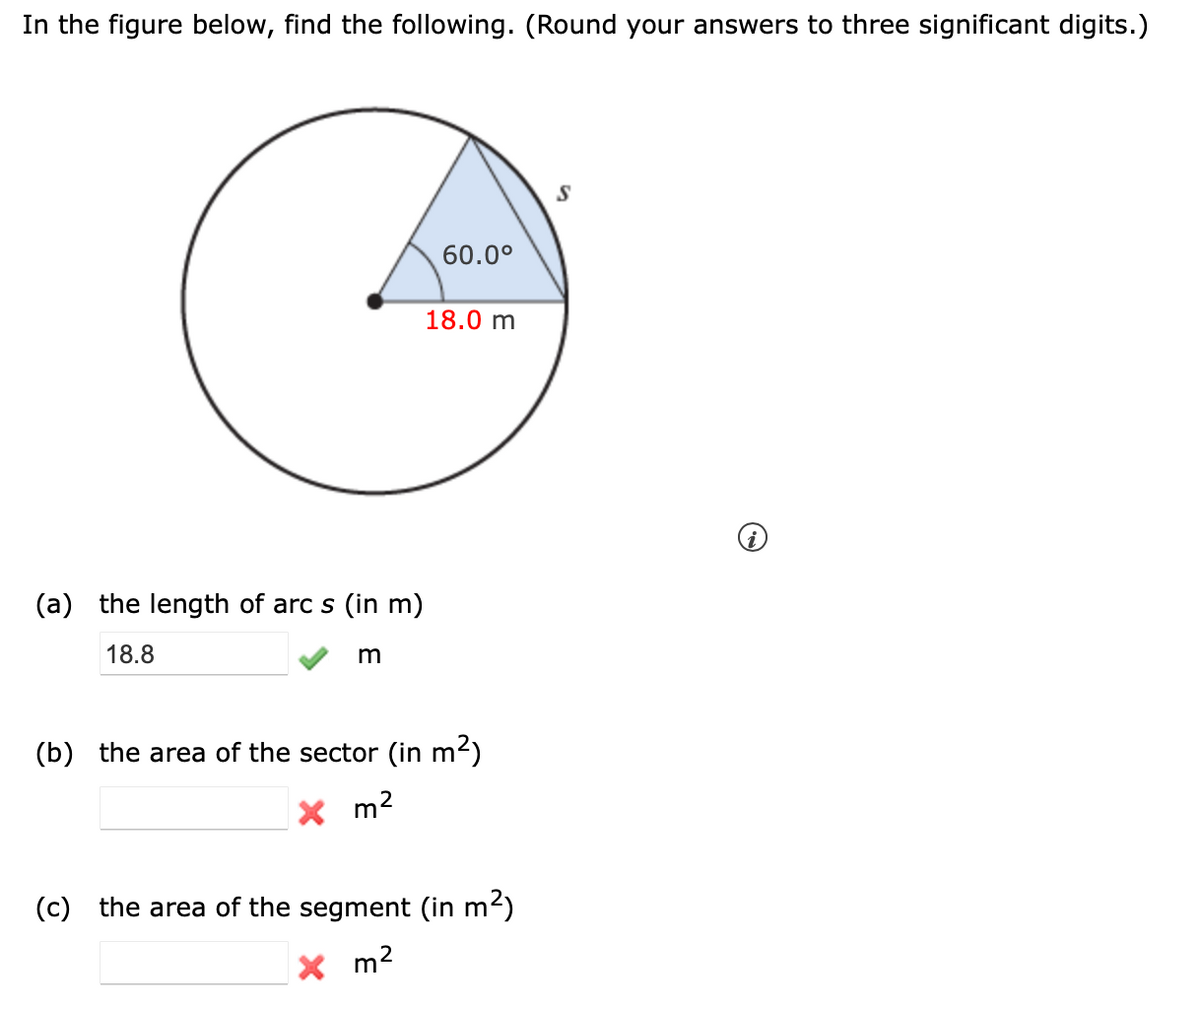 In the figure below, find the following. (Round your answers to three significant digits.)
60.0°
18.0 m
(a) the length of arc s (in m)
18.8
m
(b) the area of the sector (in m2)
X m2
(c) the area of the segment (in m2)
X m2
